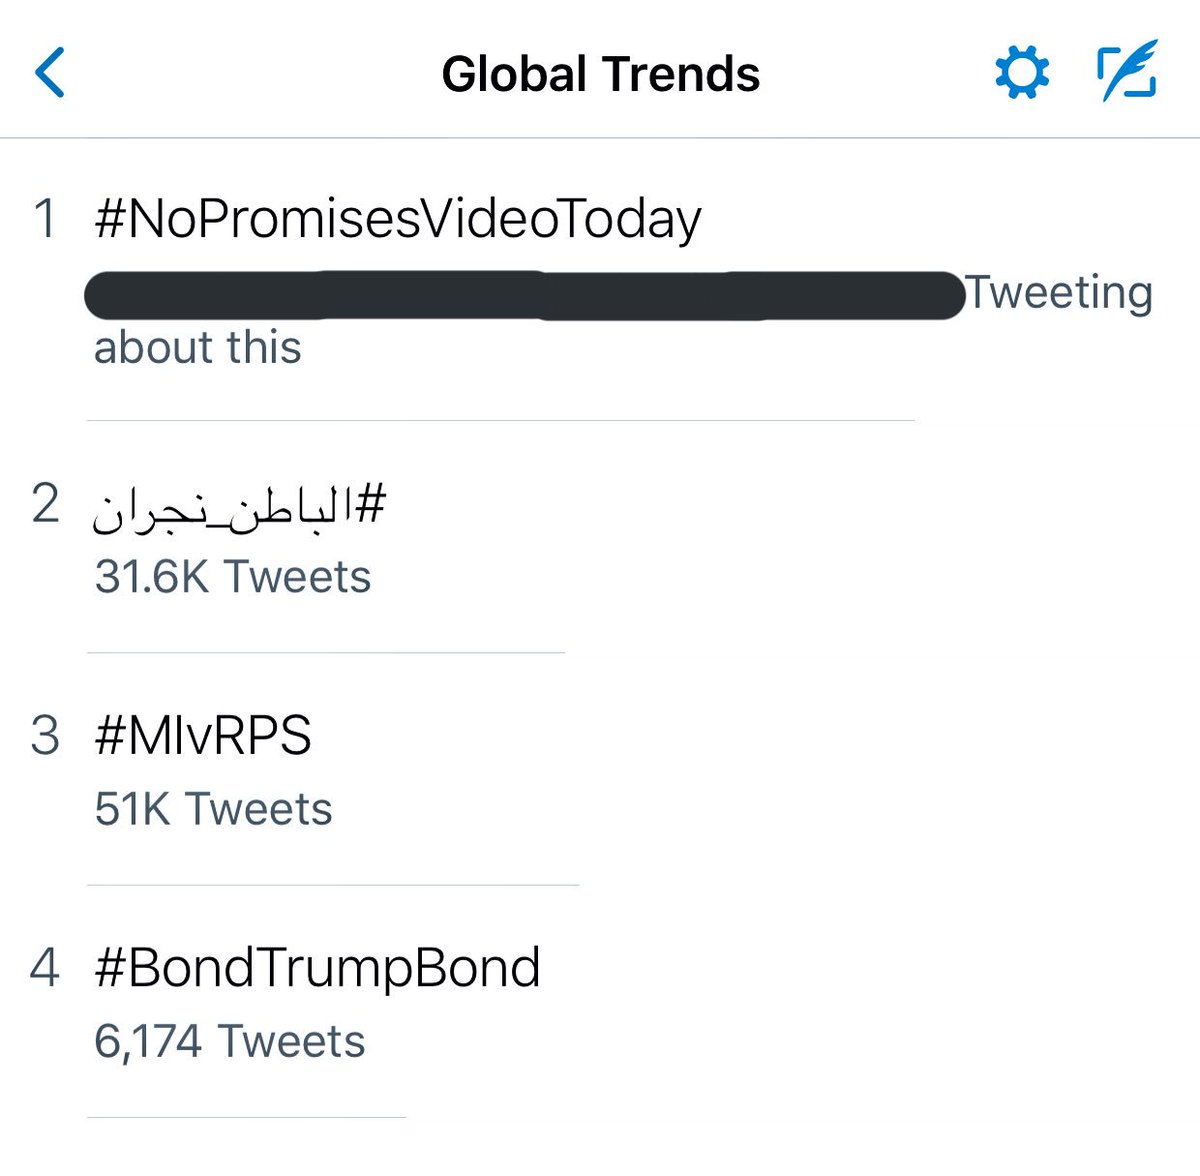 RT @LovatoArmyUS: #NoPromisesVideoToday is #1 at Global trends ???? https://t.co/4iVTfFpGtE